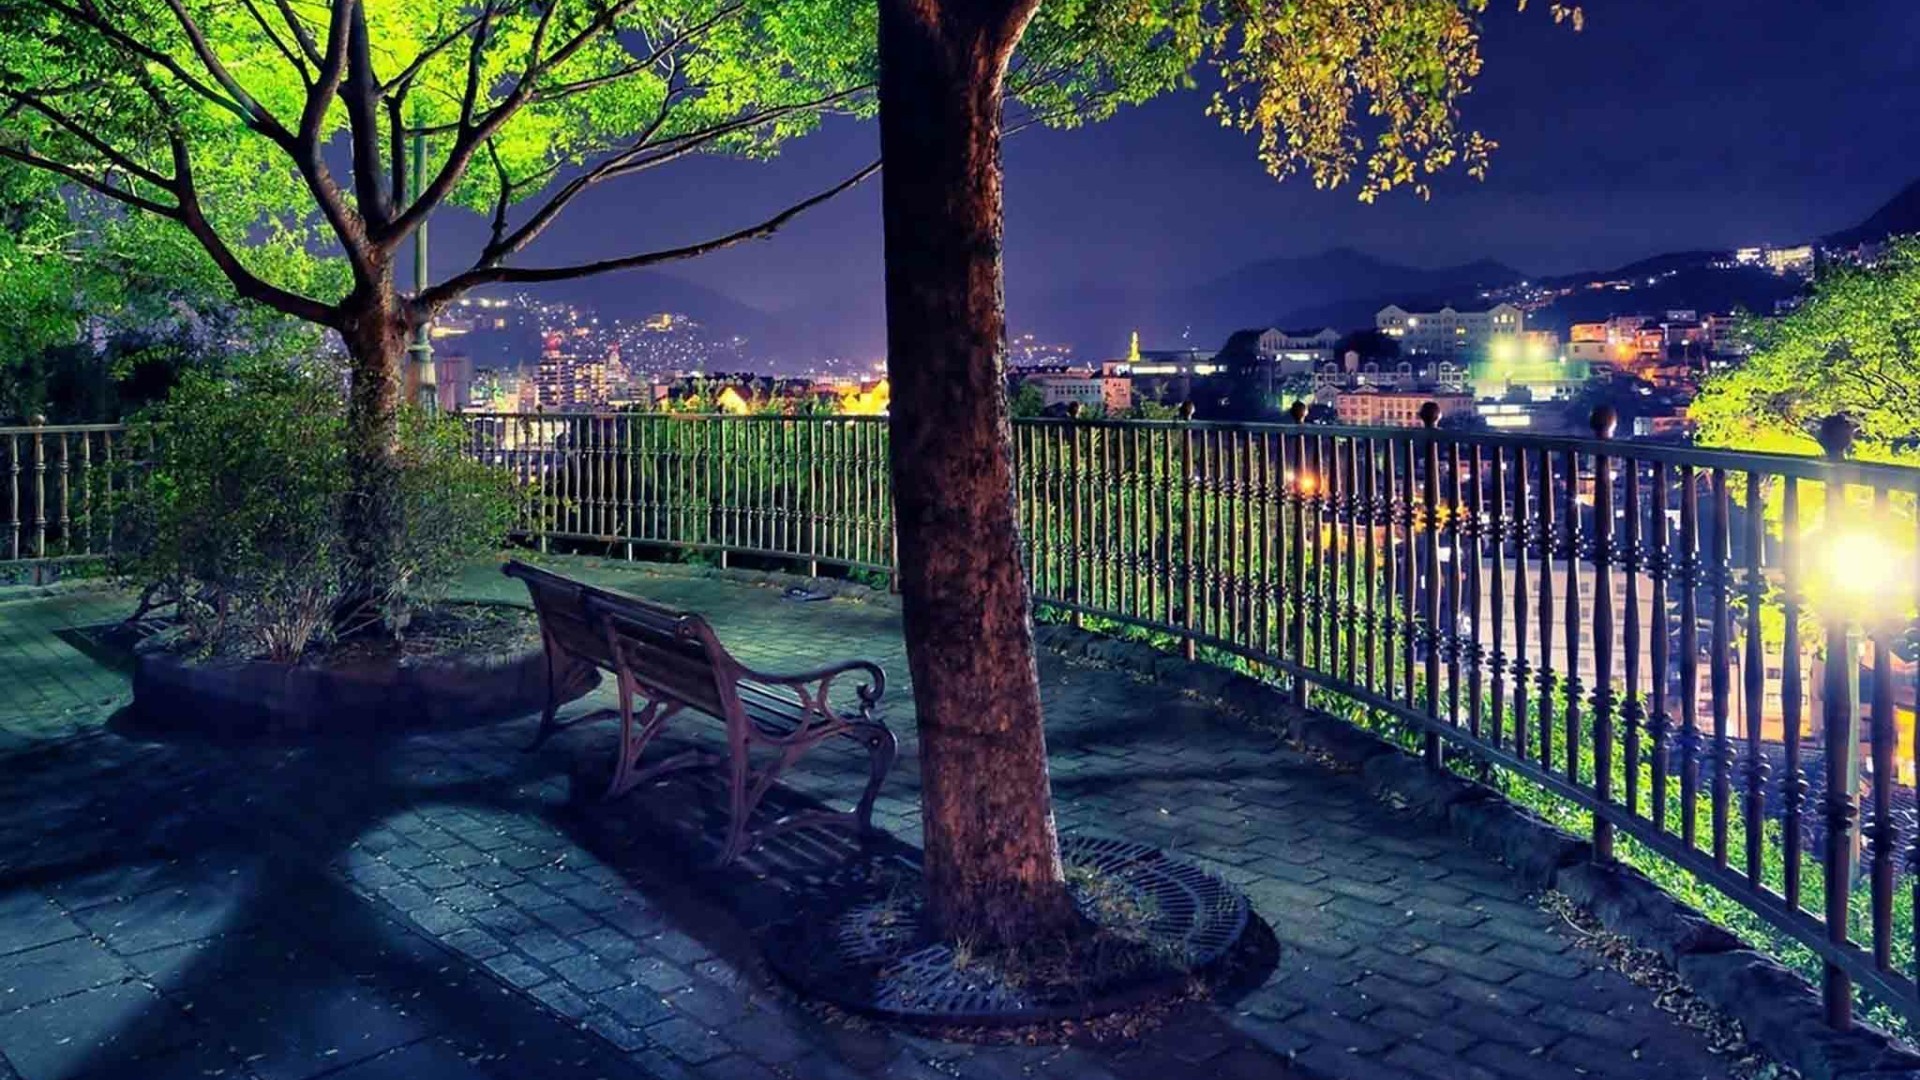 1920x1080 Lone bench over the lights of the city wallpaper